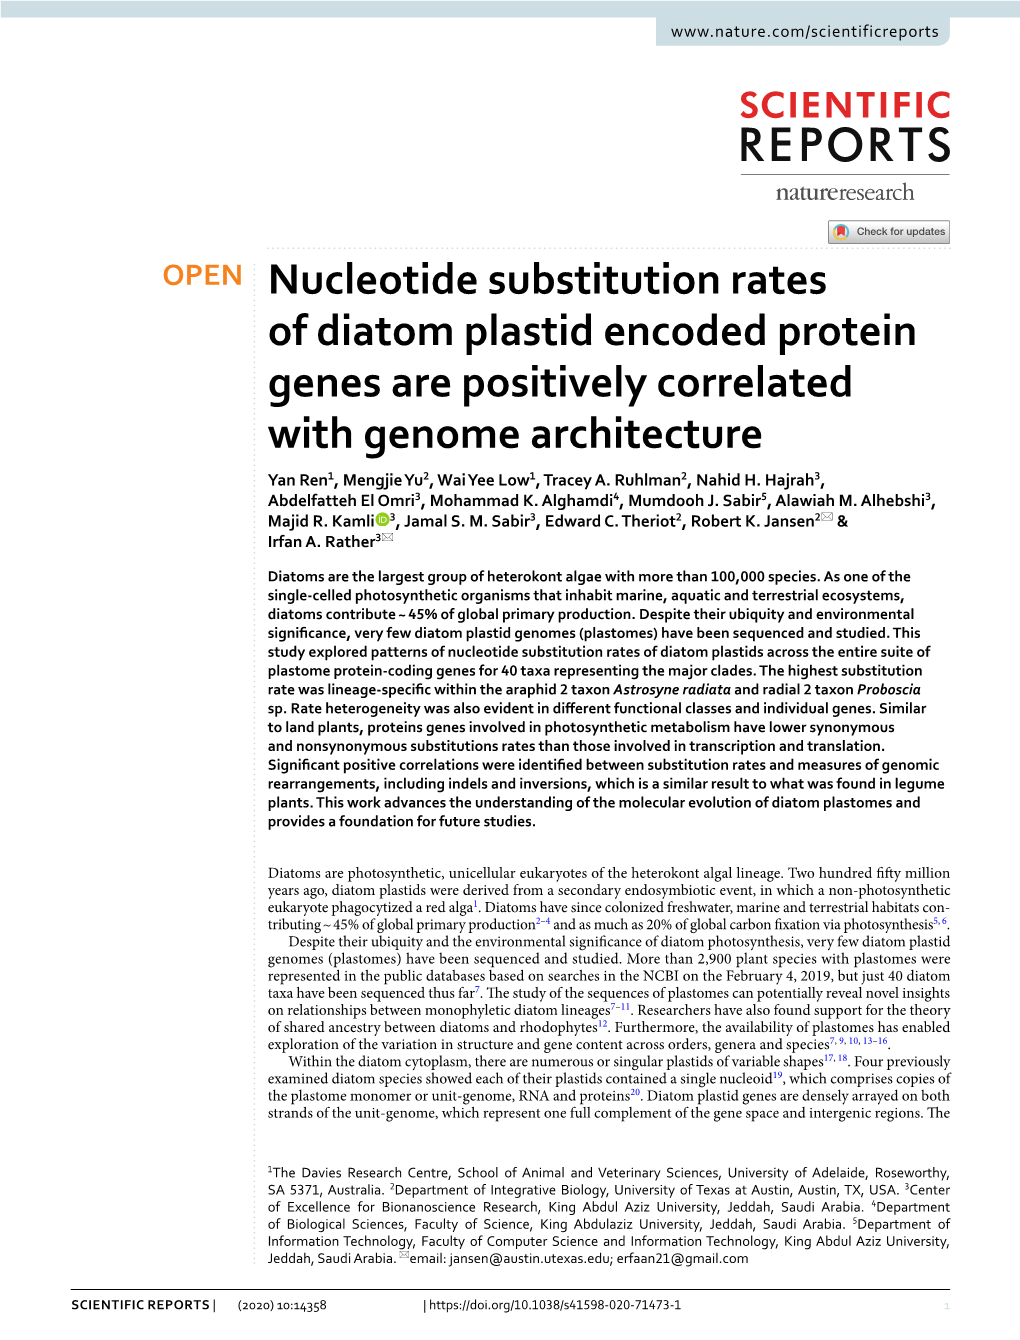 Nucleotide Substitution Rates of Diatom Plastid Encoded Protein Genes Are Positively Correlated with Genome Architecture Yan Ren1, Mengjie Yu2, Wai Yee Low1, Tracey A